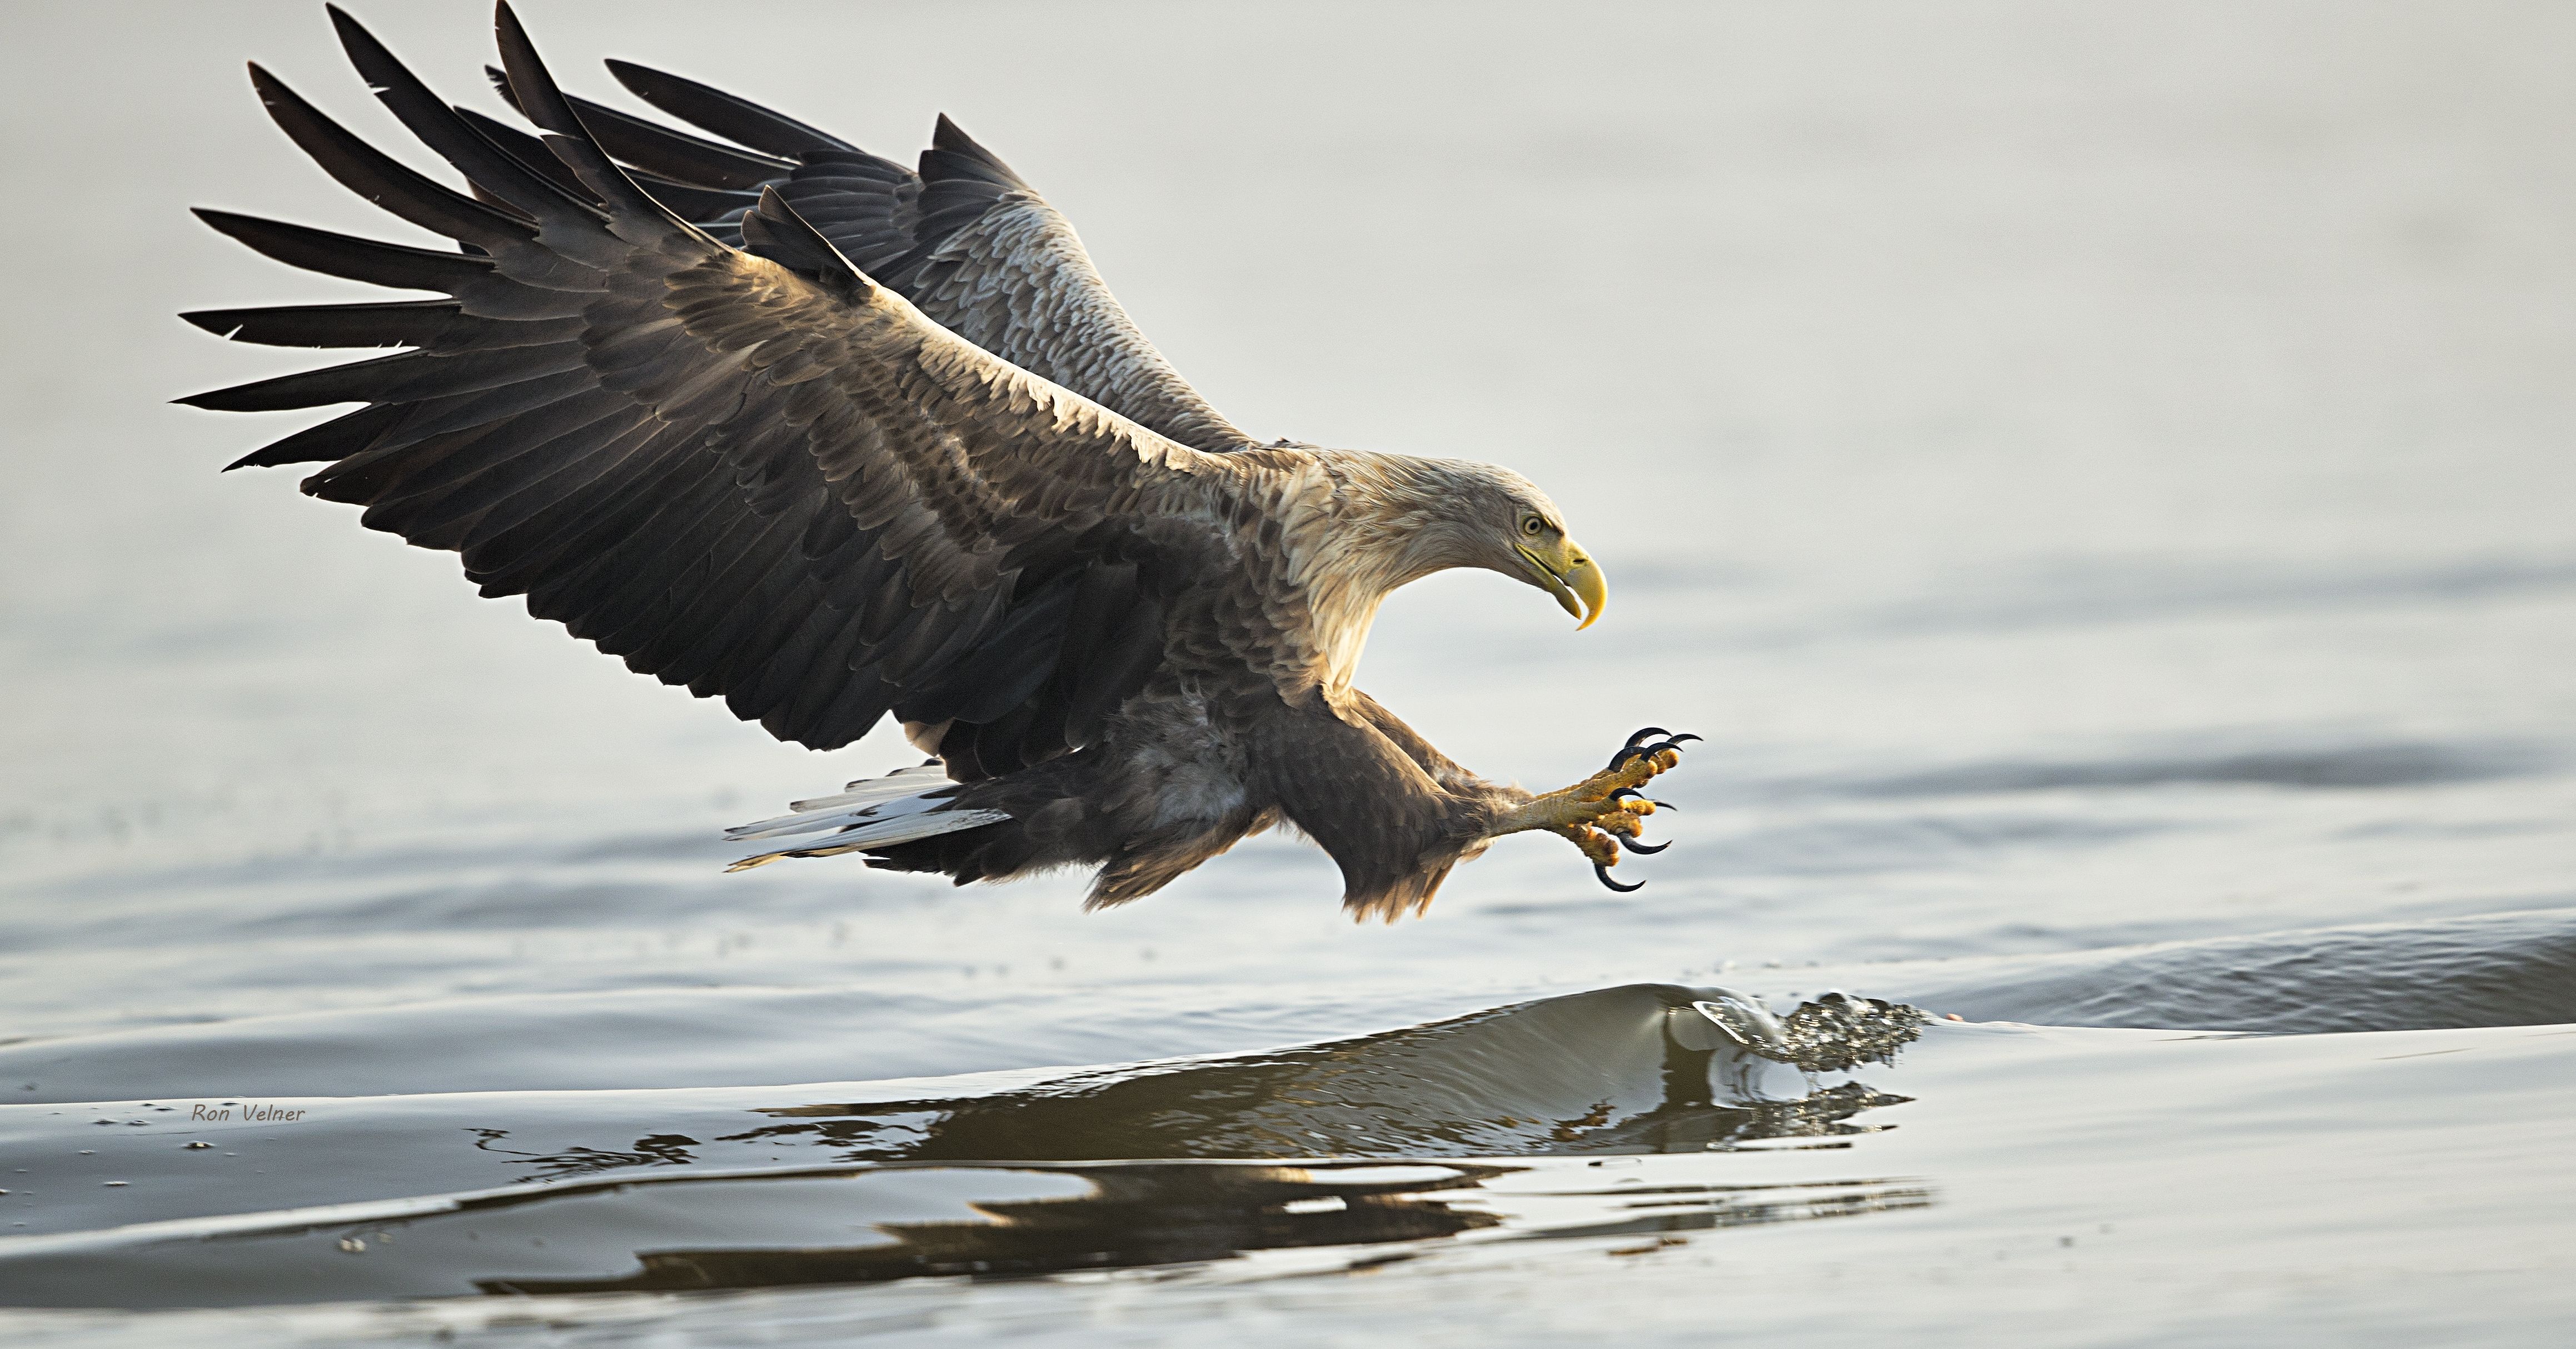 The Rewilding Oder Delta team is supporting the comeback of white-tailed eagles by working to restore fish populations and fish migration in the Stettin Lagoon and associated rivers.